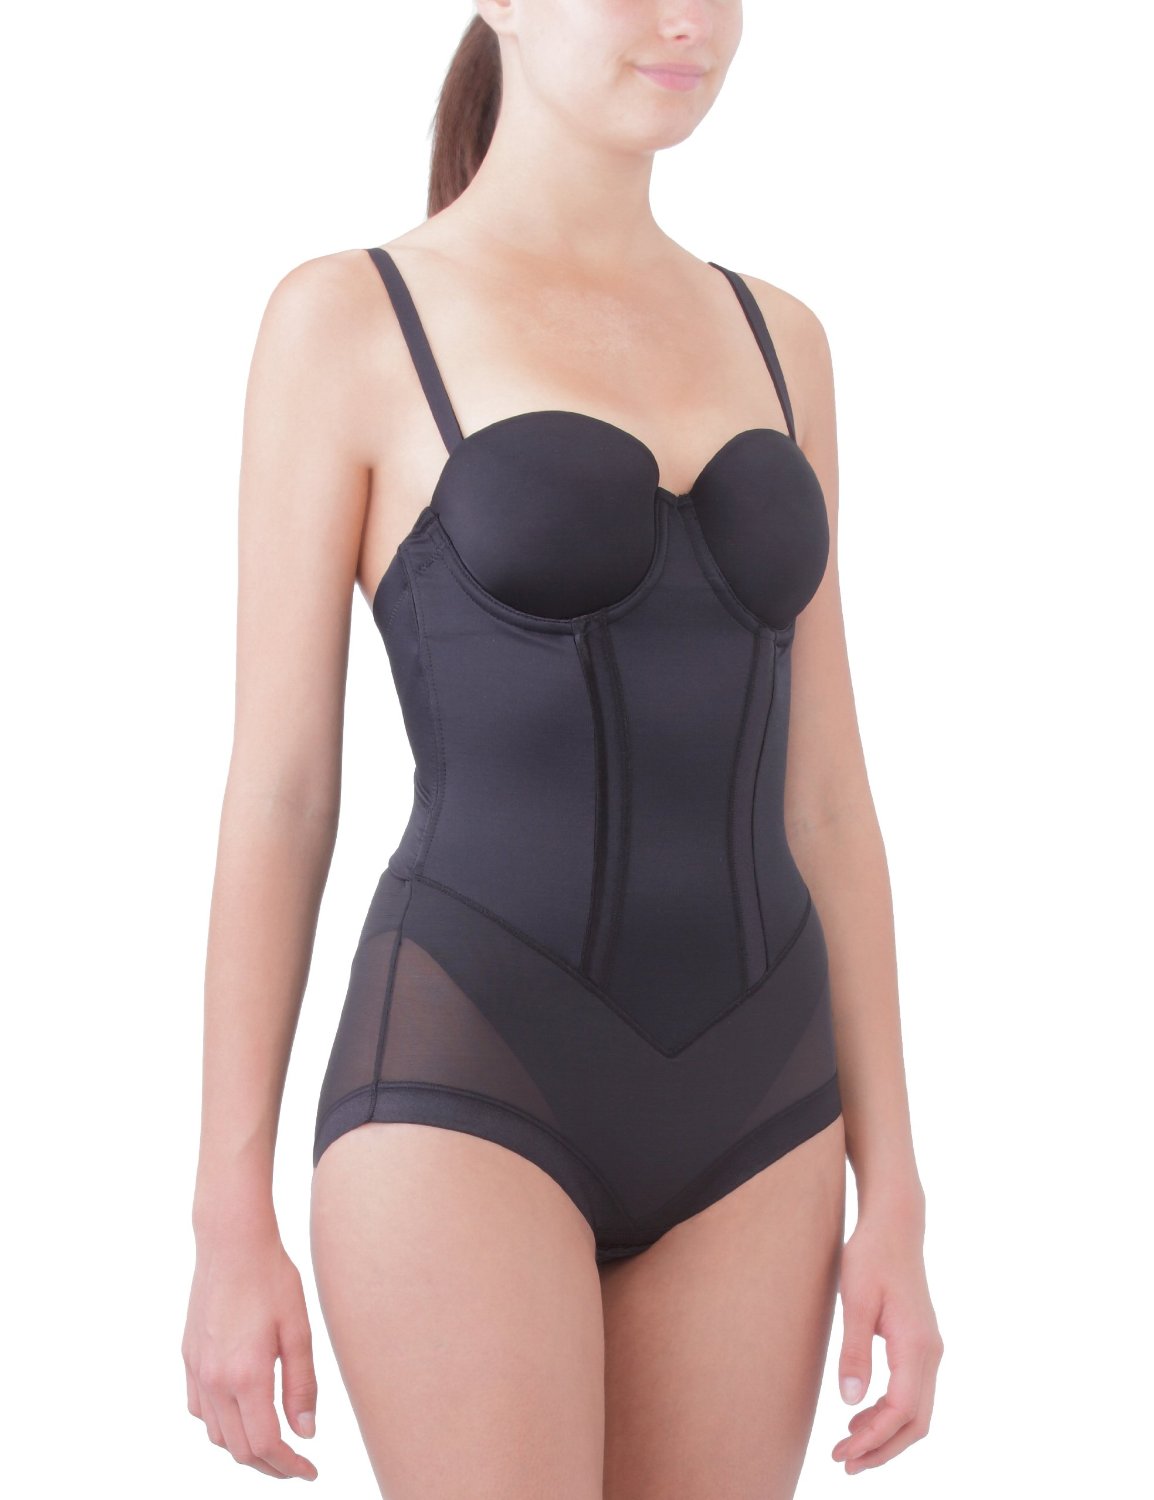 Flexees Maidenform Women's Shapewear Body Briefer with